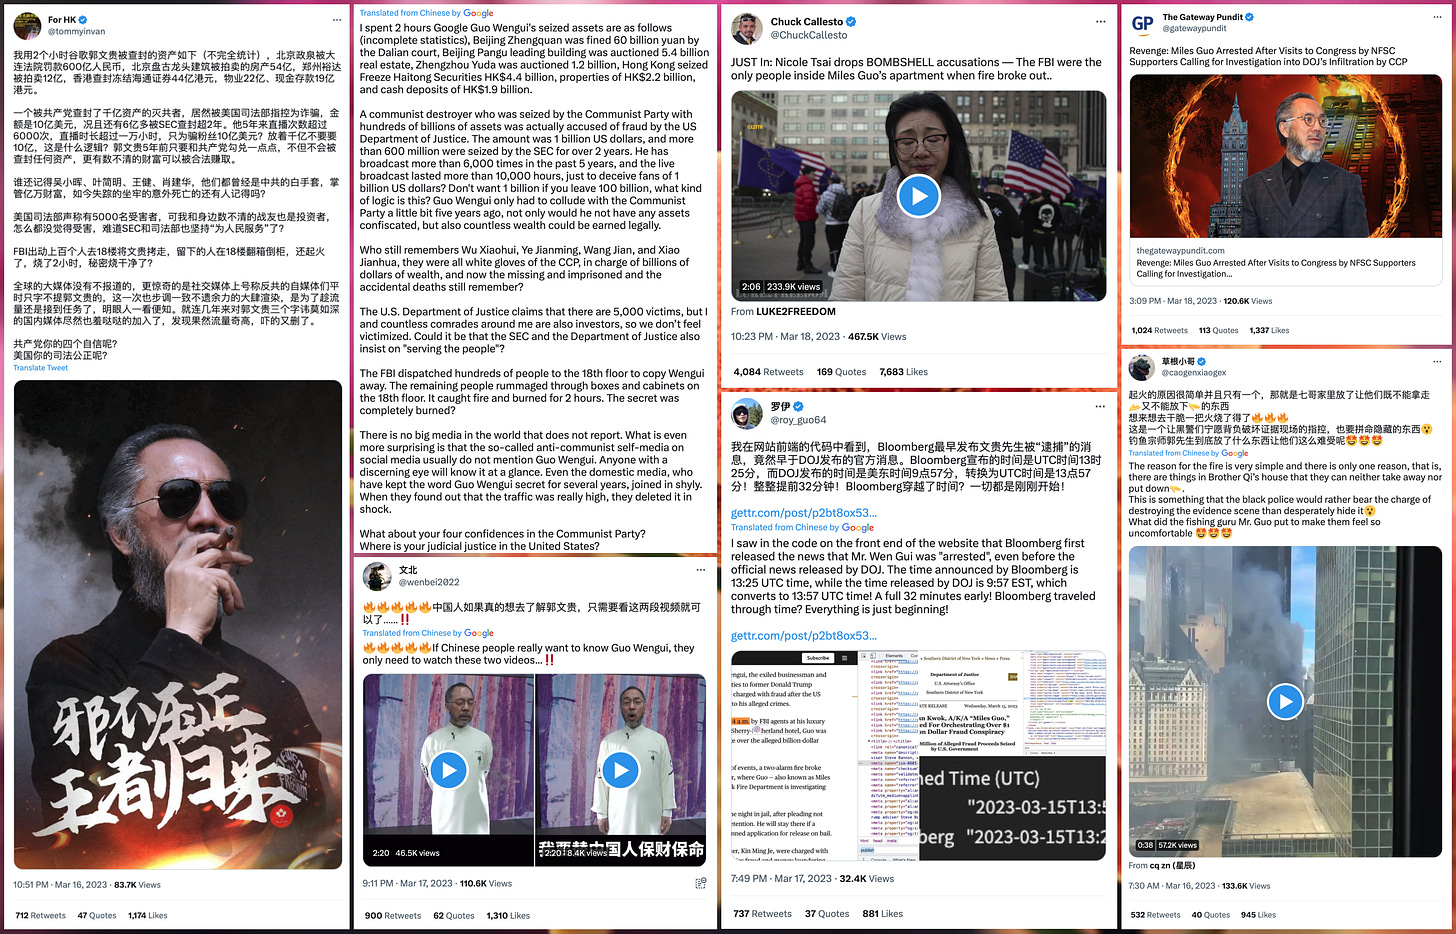 collage of tweets recently retweeted by at least 200 of the Chinese-language followers of @DrPaulGosar/@WarRoomPandemic/@maureen_bannon/@GETTRofficial